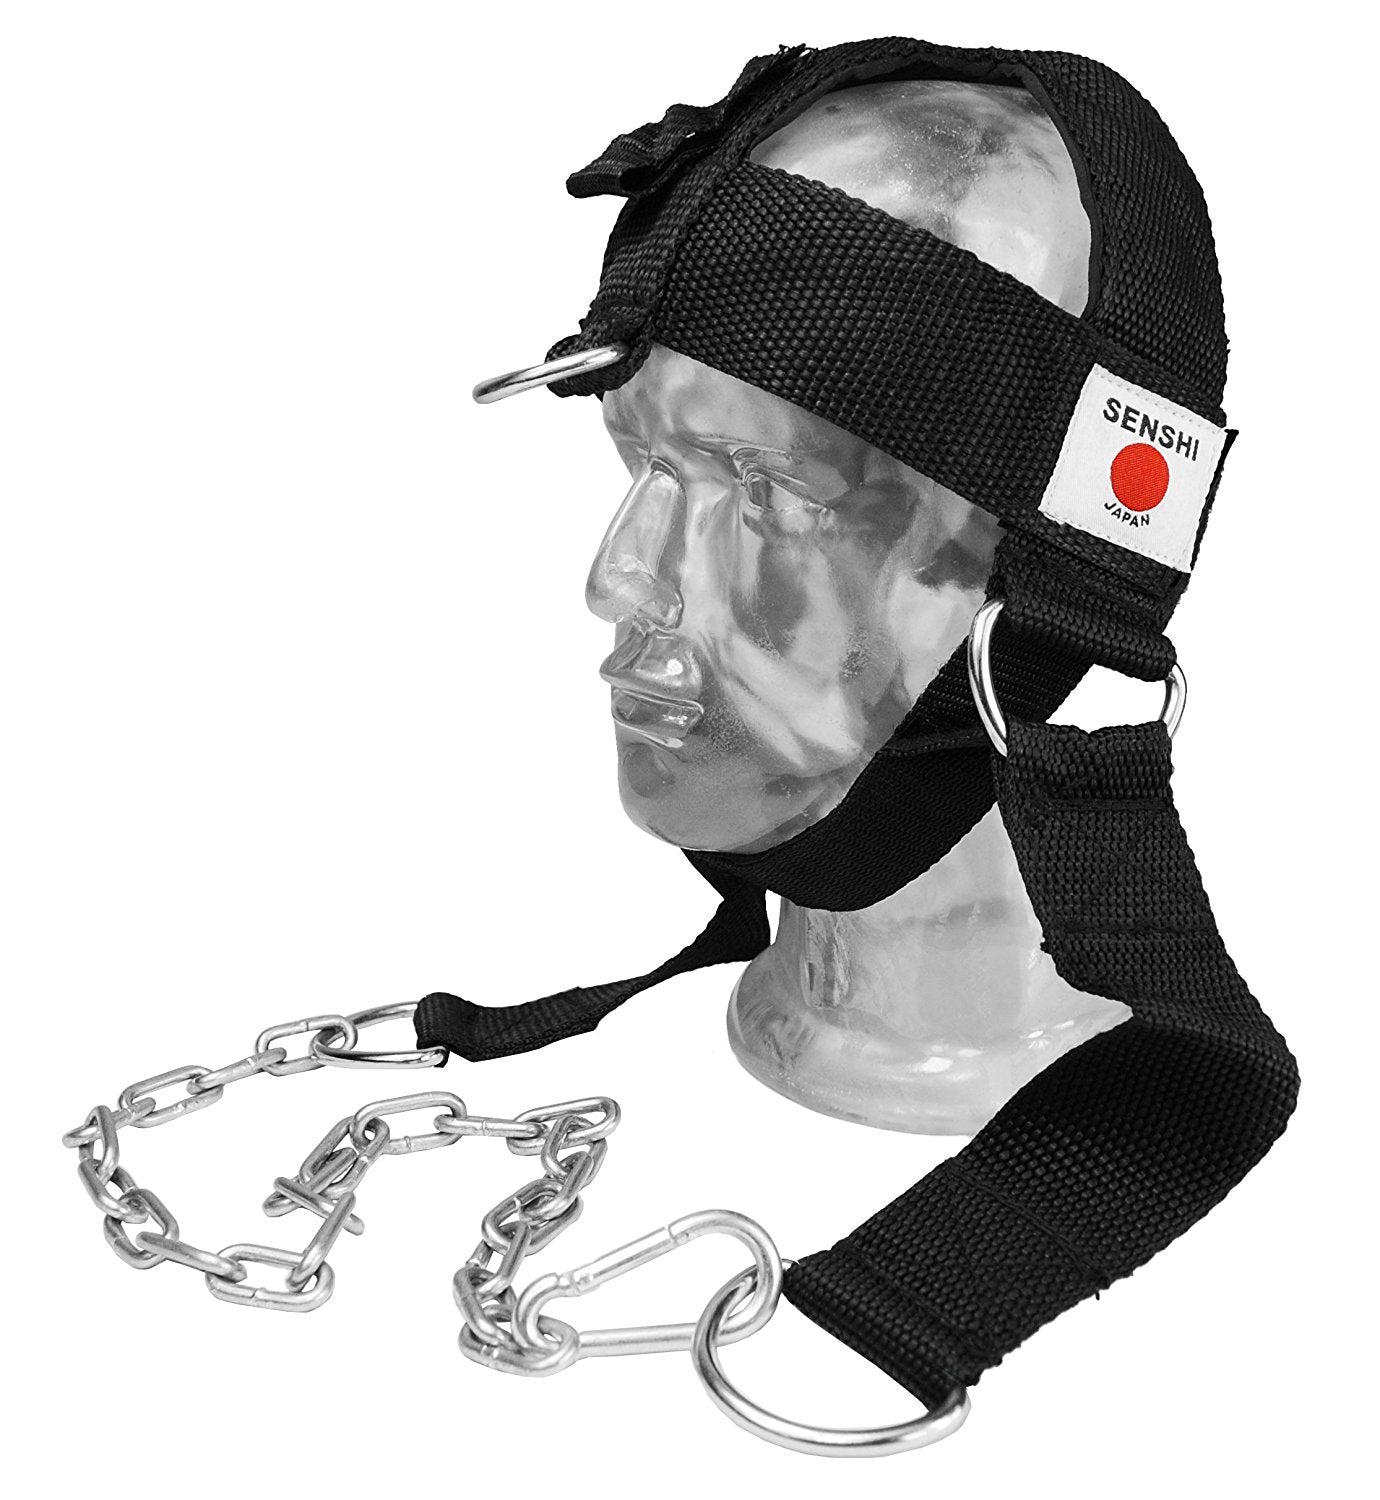 Senshi Japan Neck Harness Adjustable With Extra D-Hook On Forehead To Attach To A Cable Machine-Sports-Senshi Japan-Senshi Japan